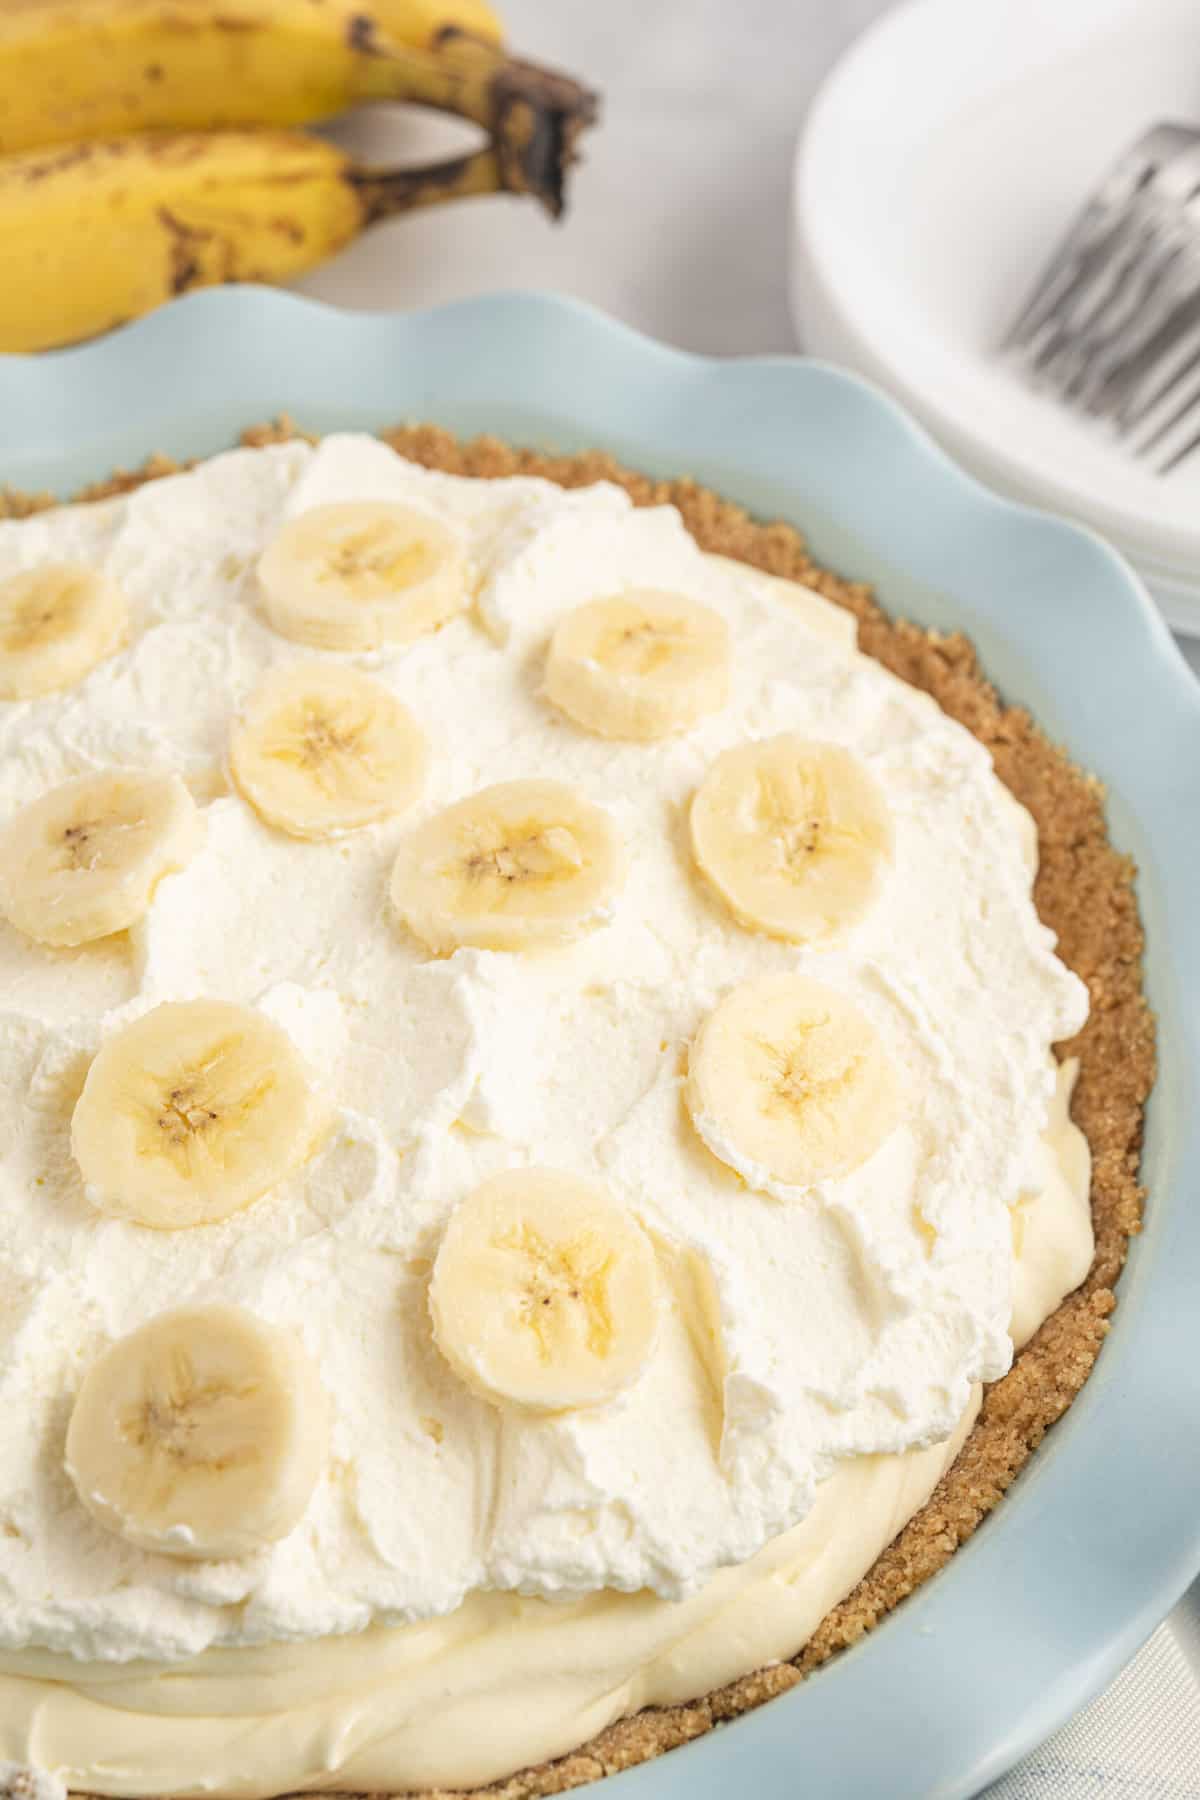 A banana cream pie is placed on a white countertop next to a couple of ripe bananas.